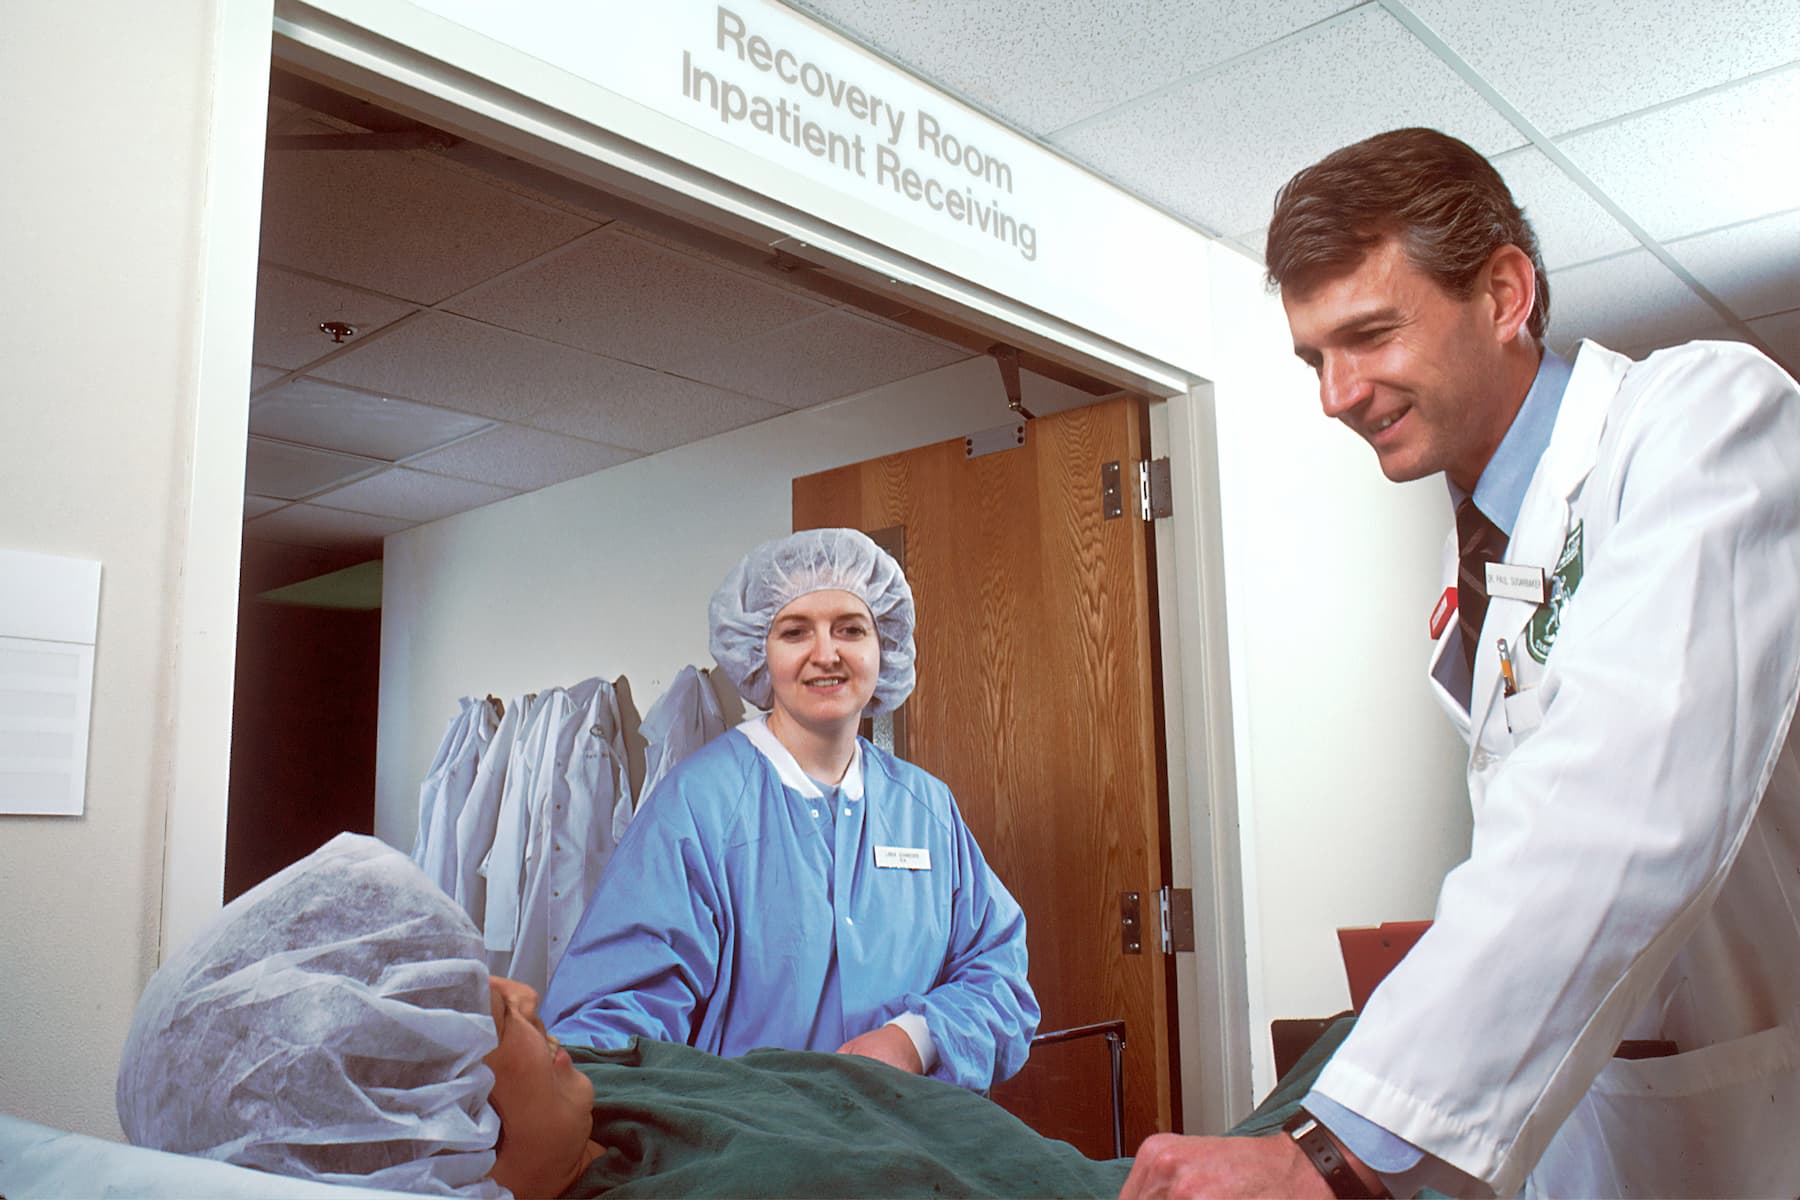 Doctor checking up on a patient after surgery